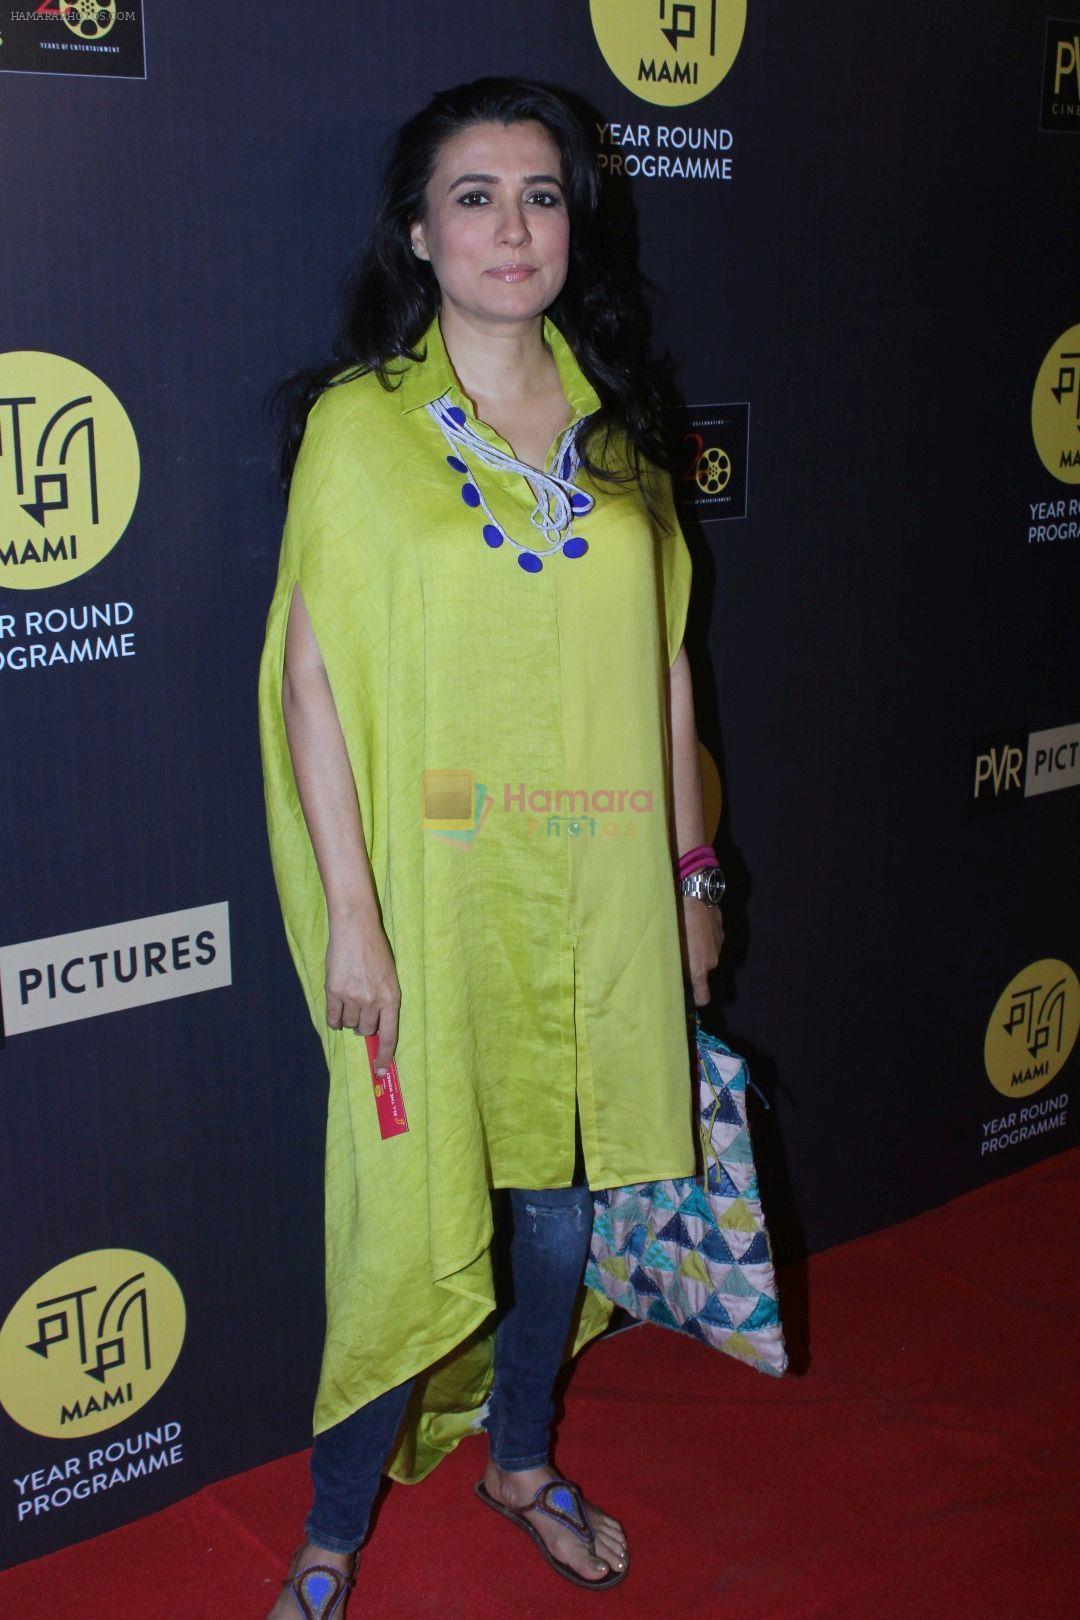 Mini Mathur at The Red Carpet Of Hollywood Movie All The Money In The World on 29th Dec 2017